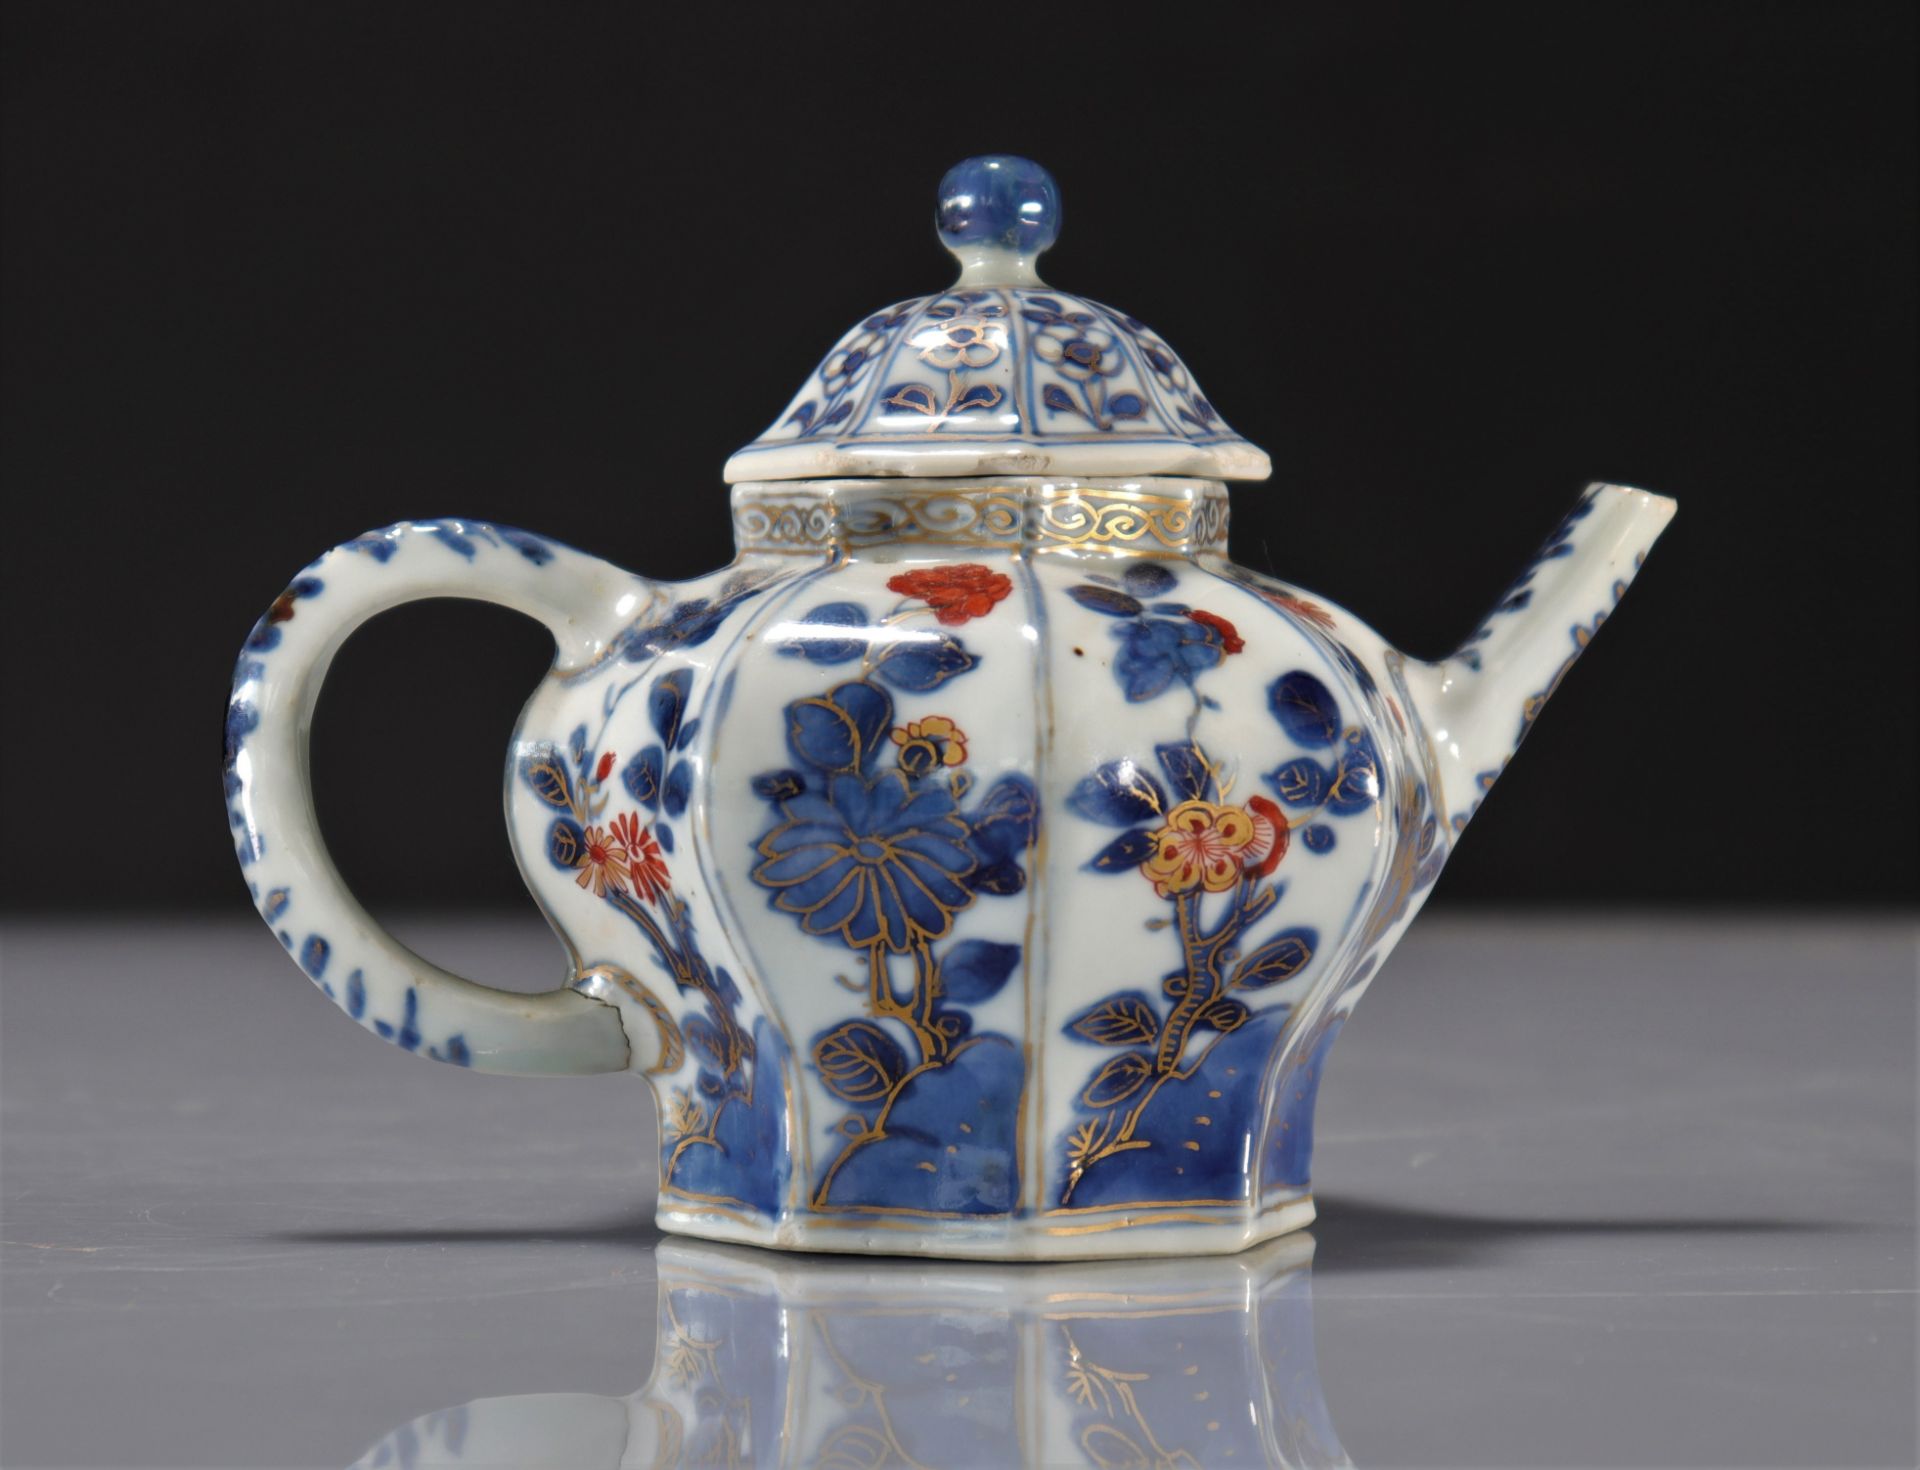 18th century Chinese porcelain teapot